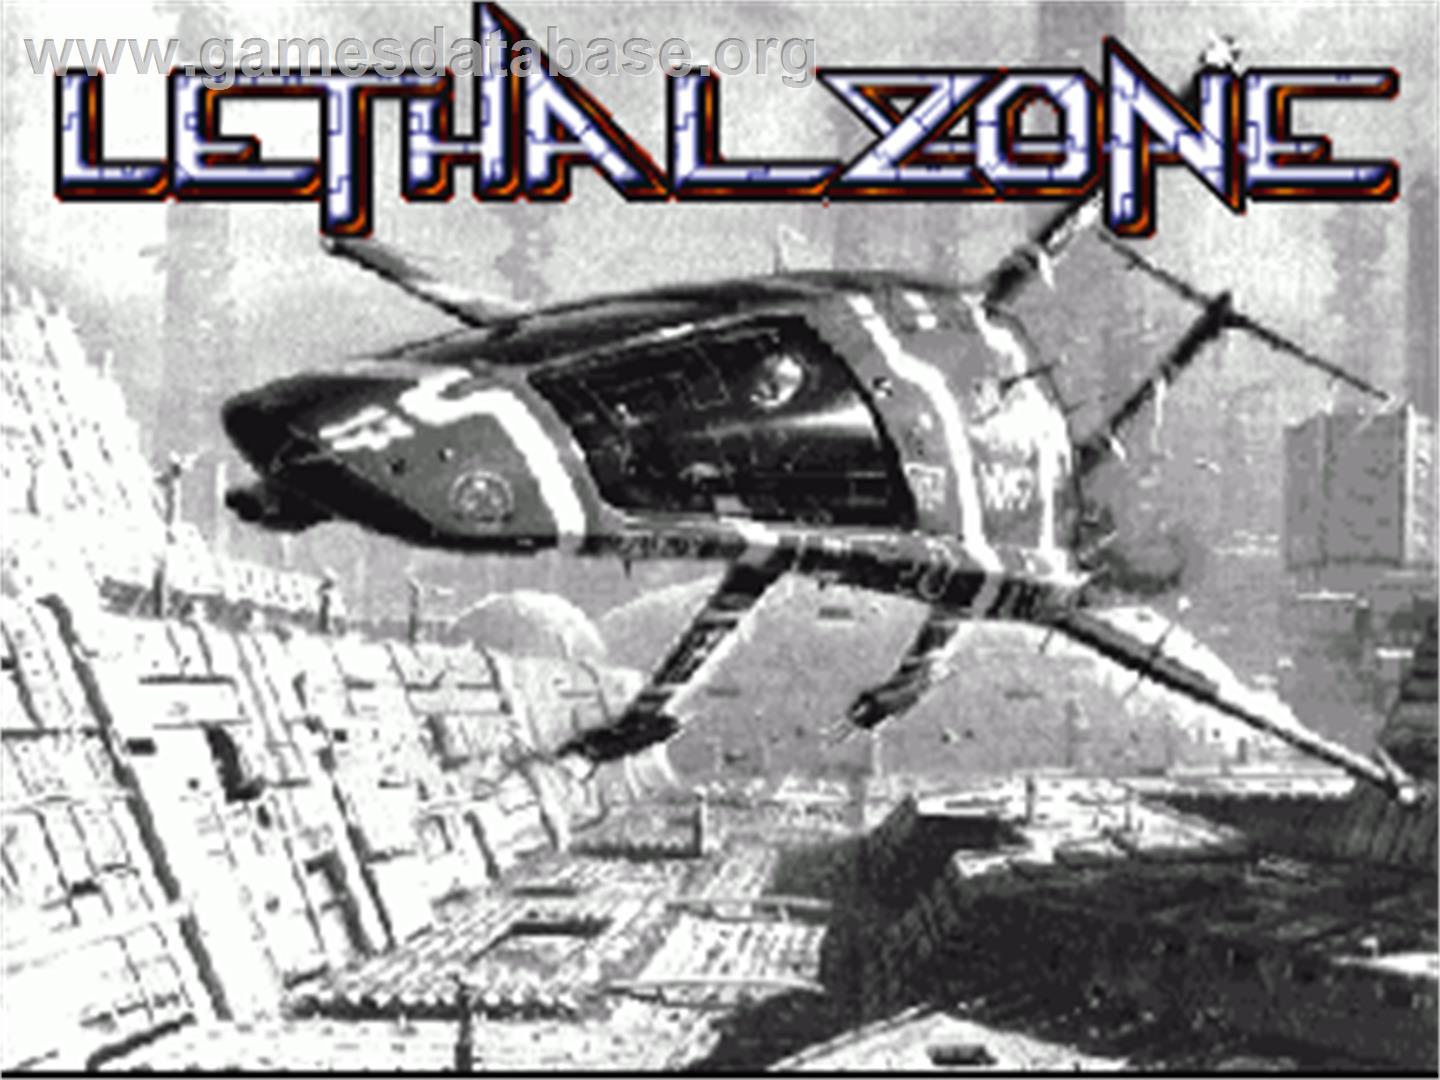 Lethal Zone - Commodore Amiga - Artwork - In Game